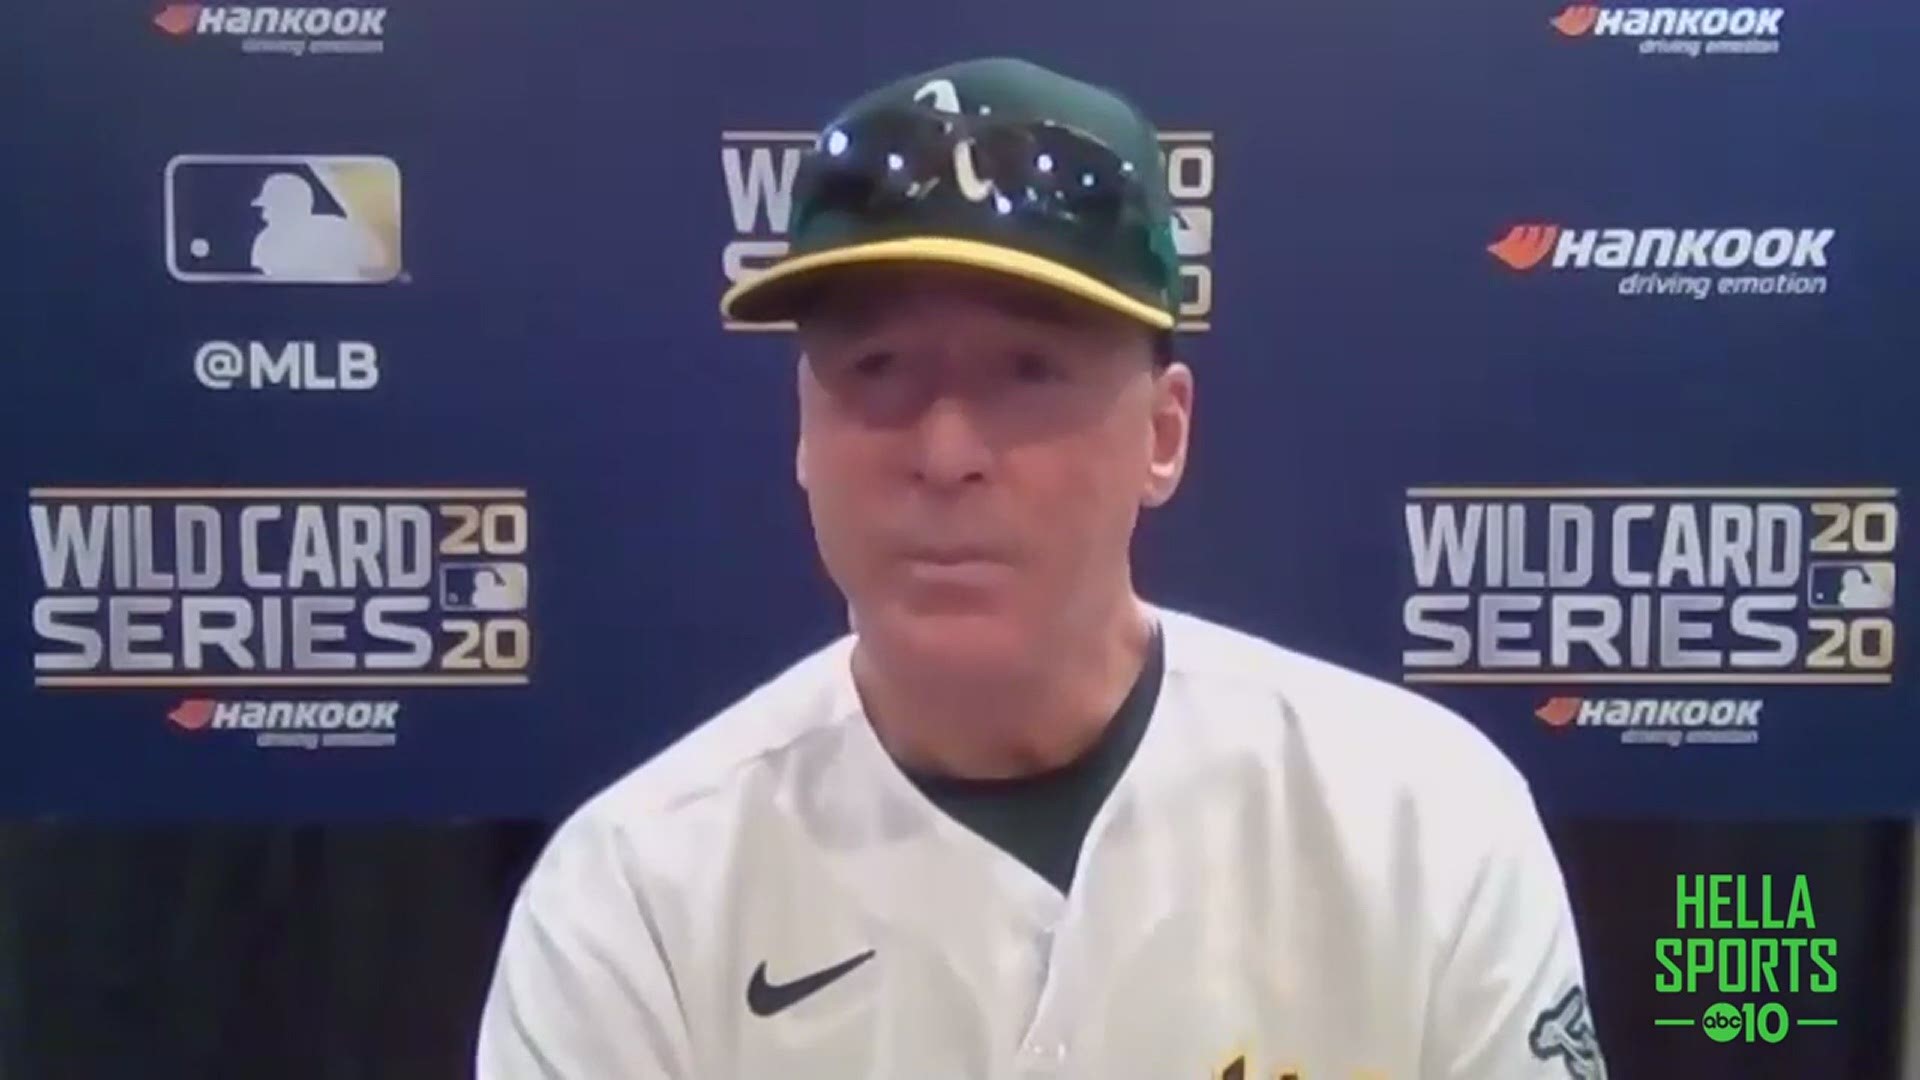 Oakland A's manager Bob Melvin gives his thoughts on Monday's 4-1 loss to the Chicago White Sox in Game One of the Wild Card series and facing elimination.